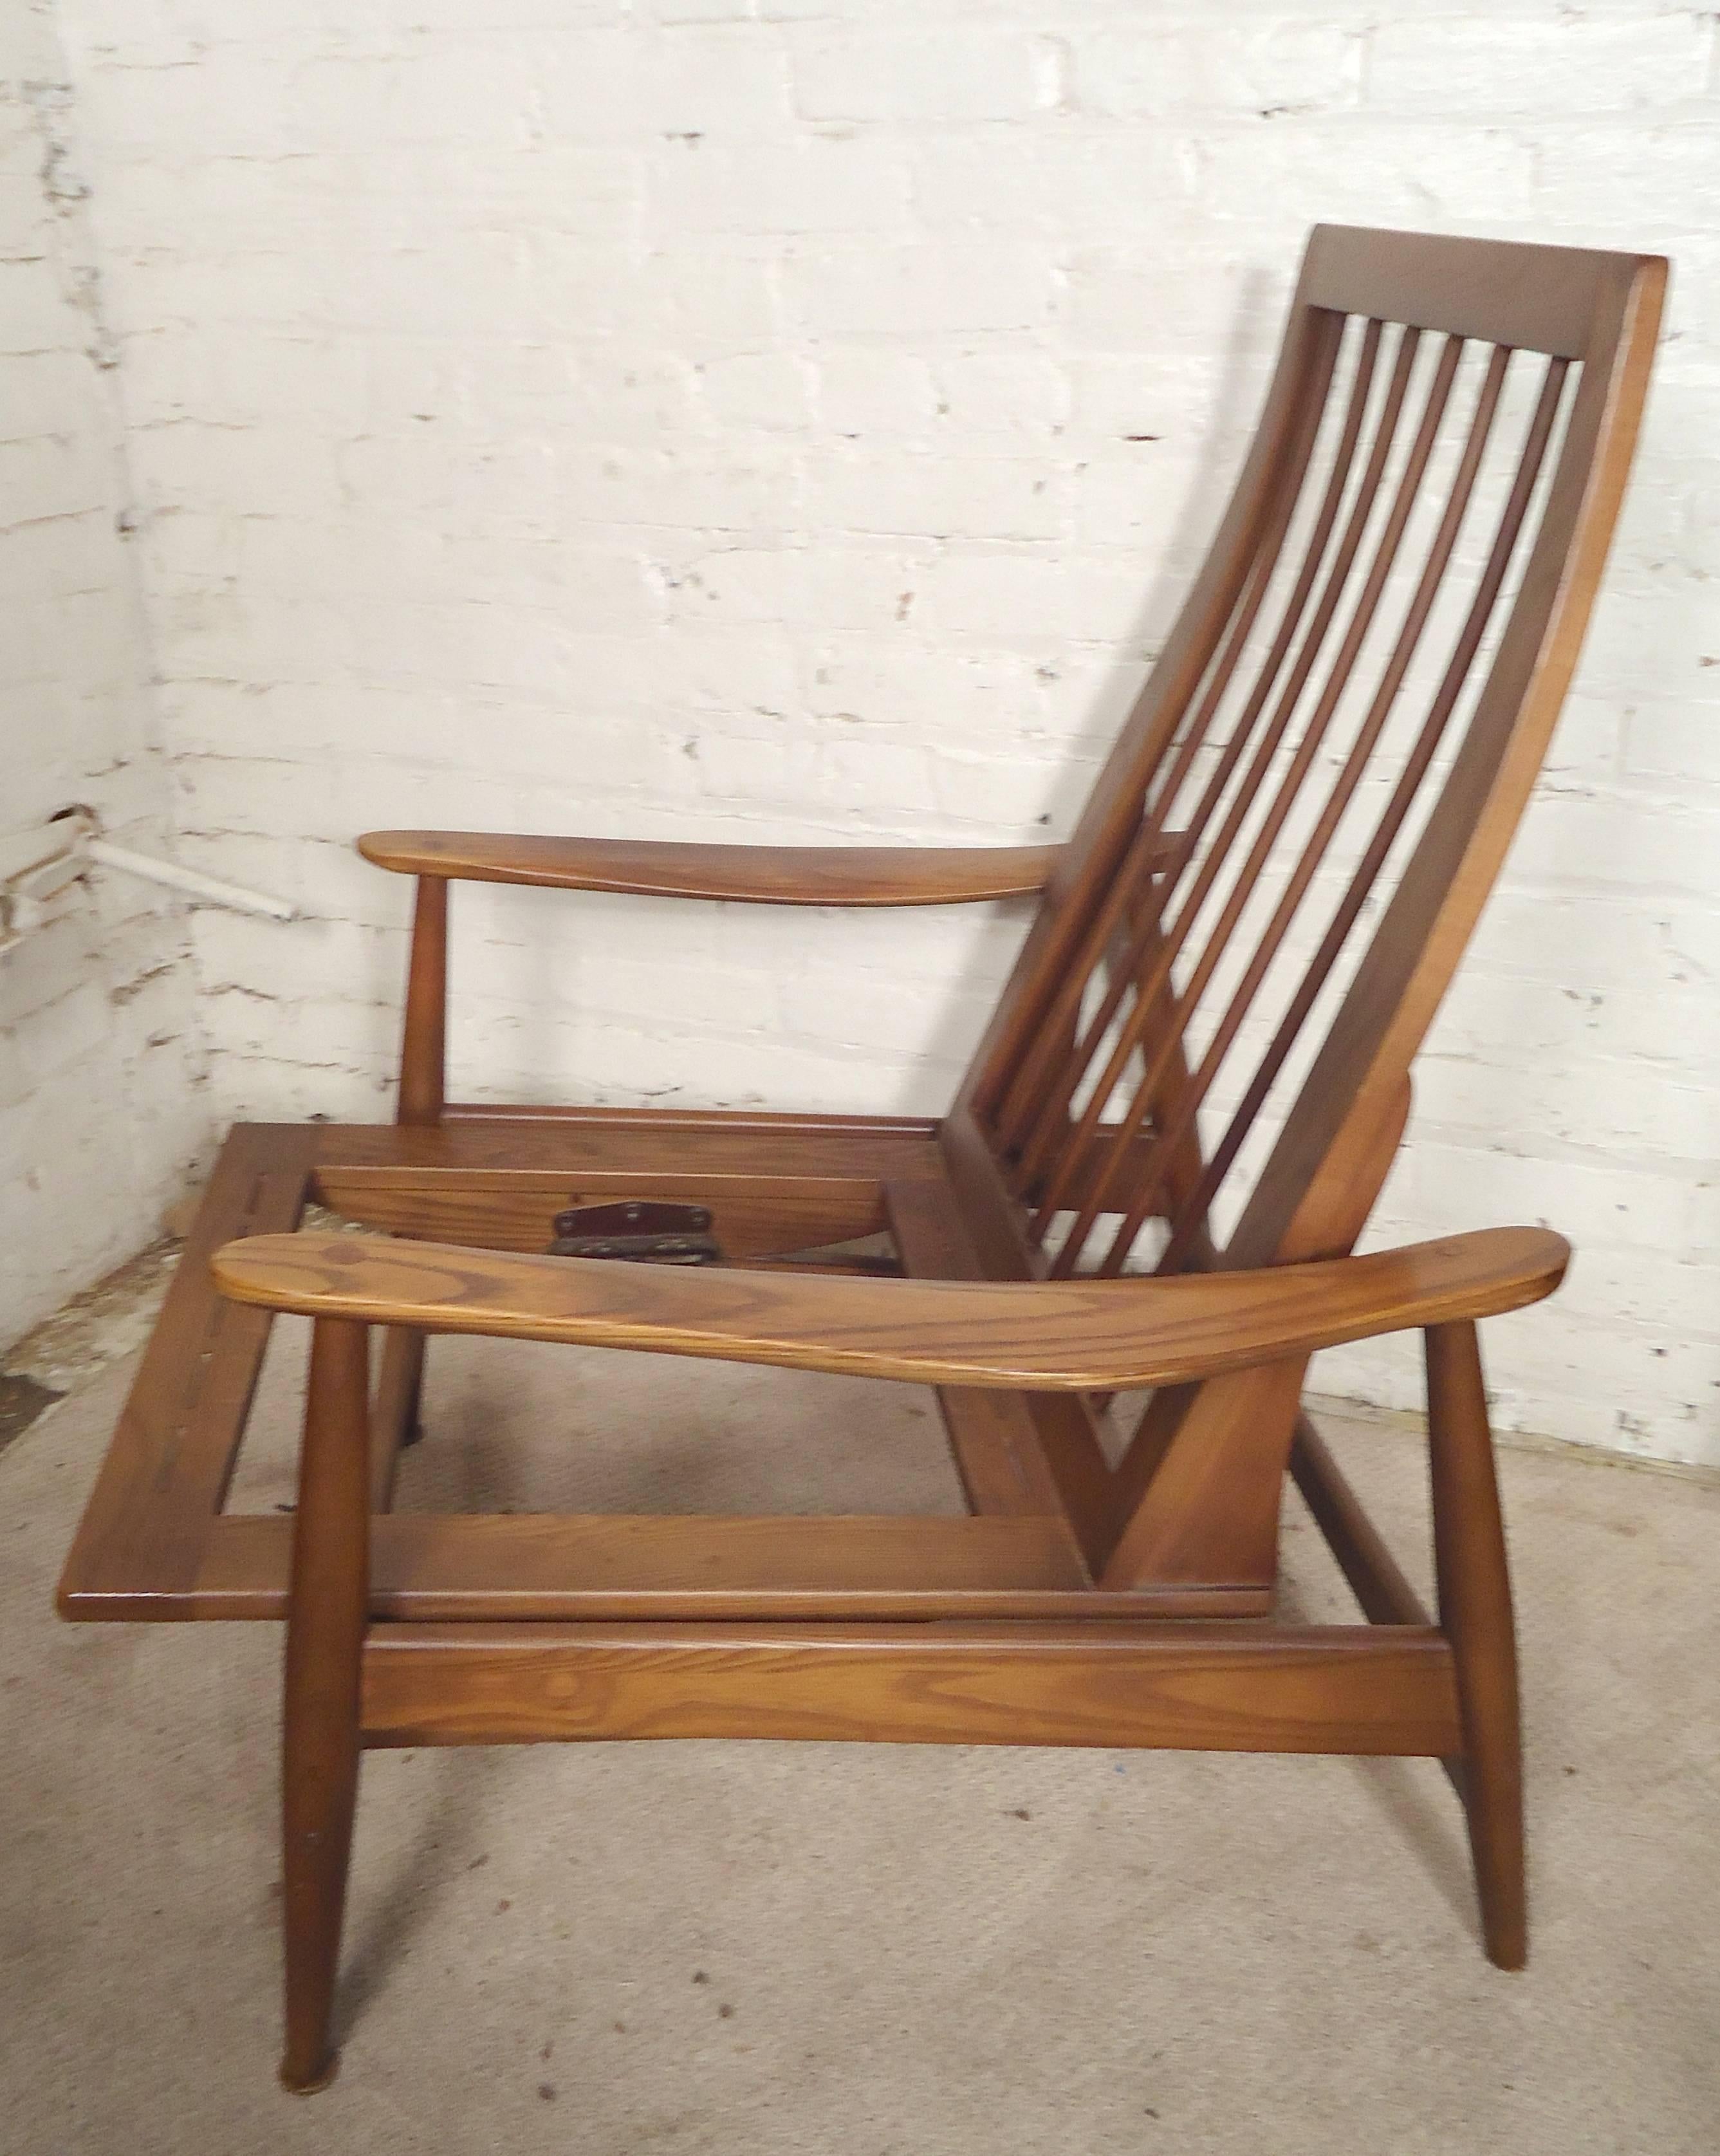 Pair of vintage armchairs in walnut with rocking motion. High sculpted back, long arms, spring action seat for comfortable rocking movement.

(Please confirm item location NY or NJ with dealer).
 